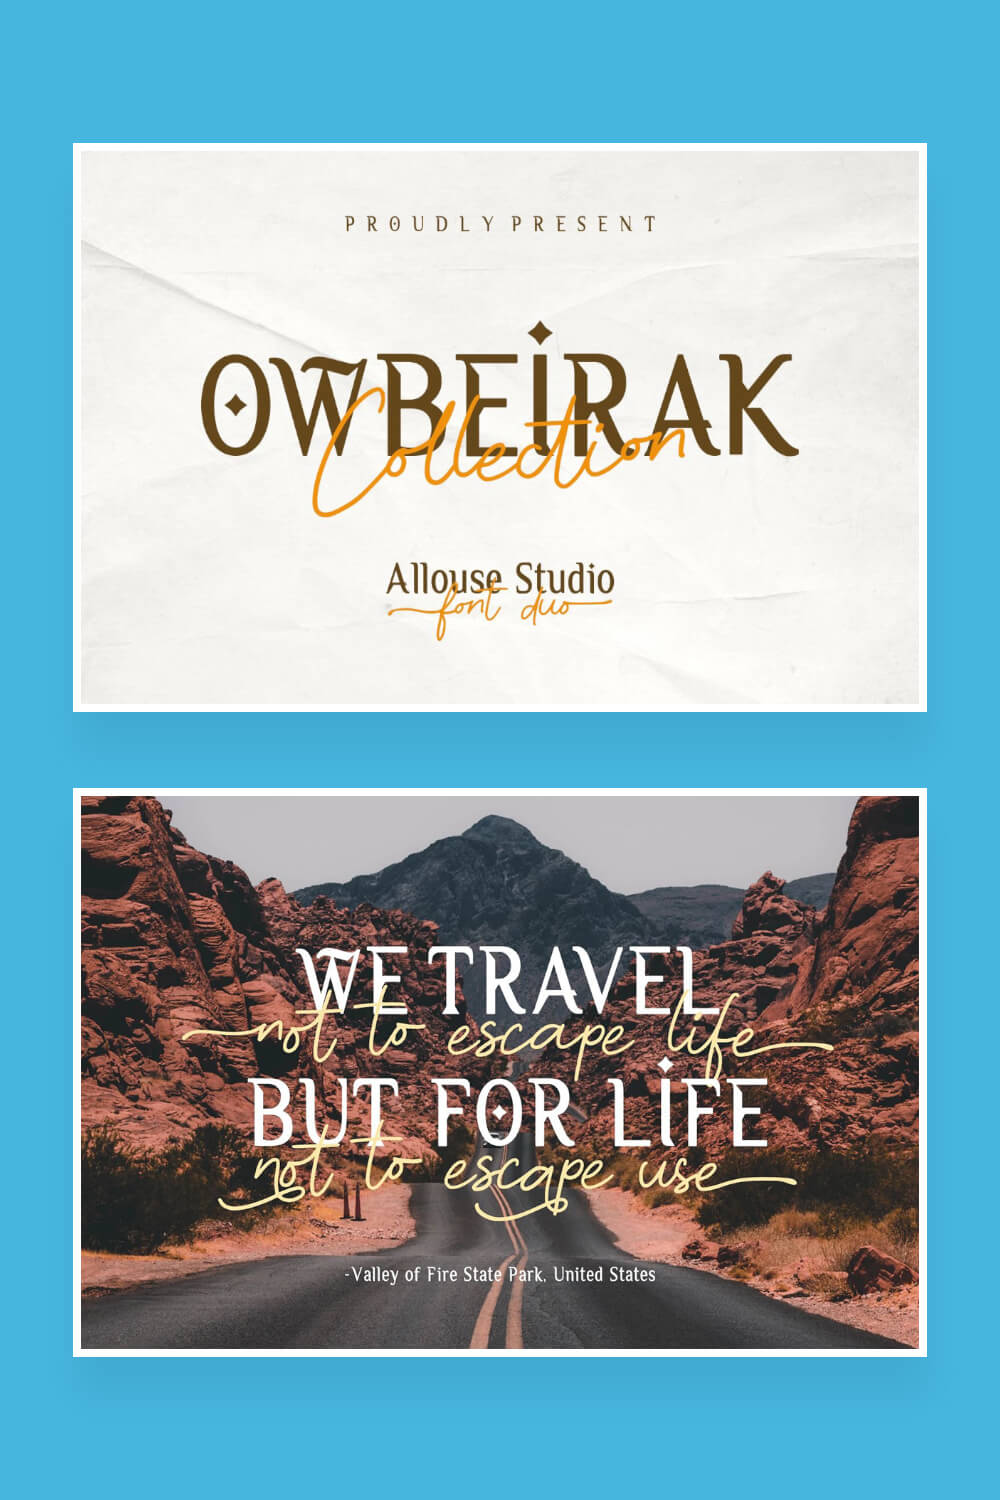 owbeirak duo serif and script collection font pinterest image.